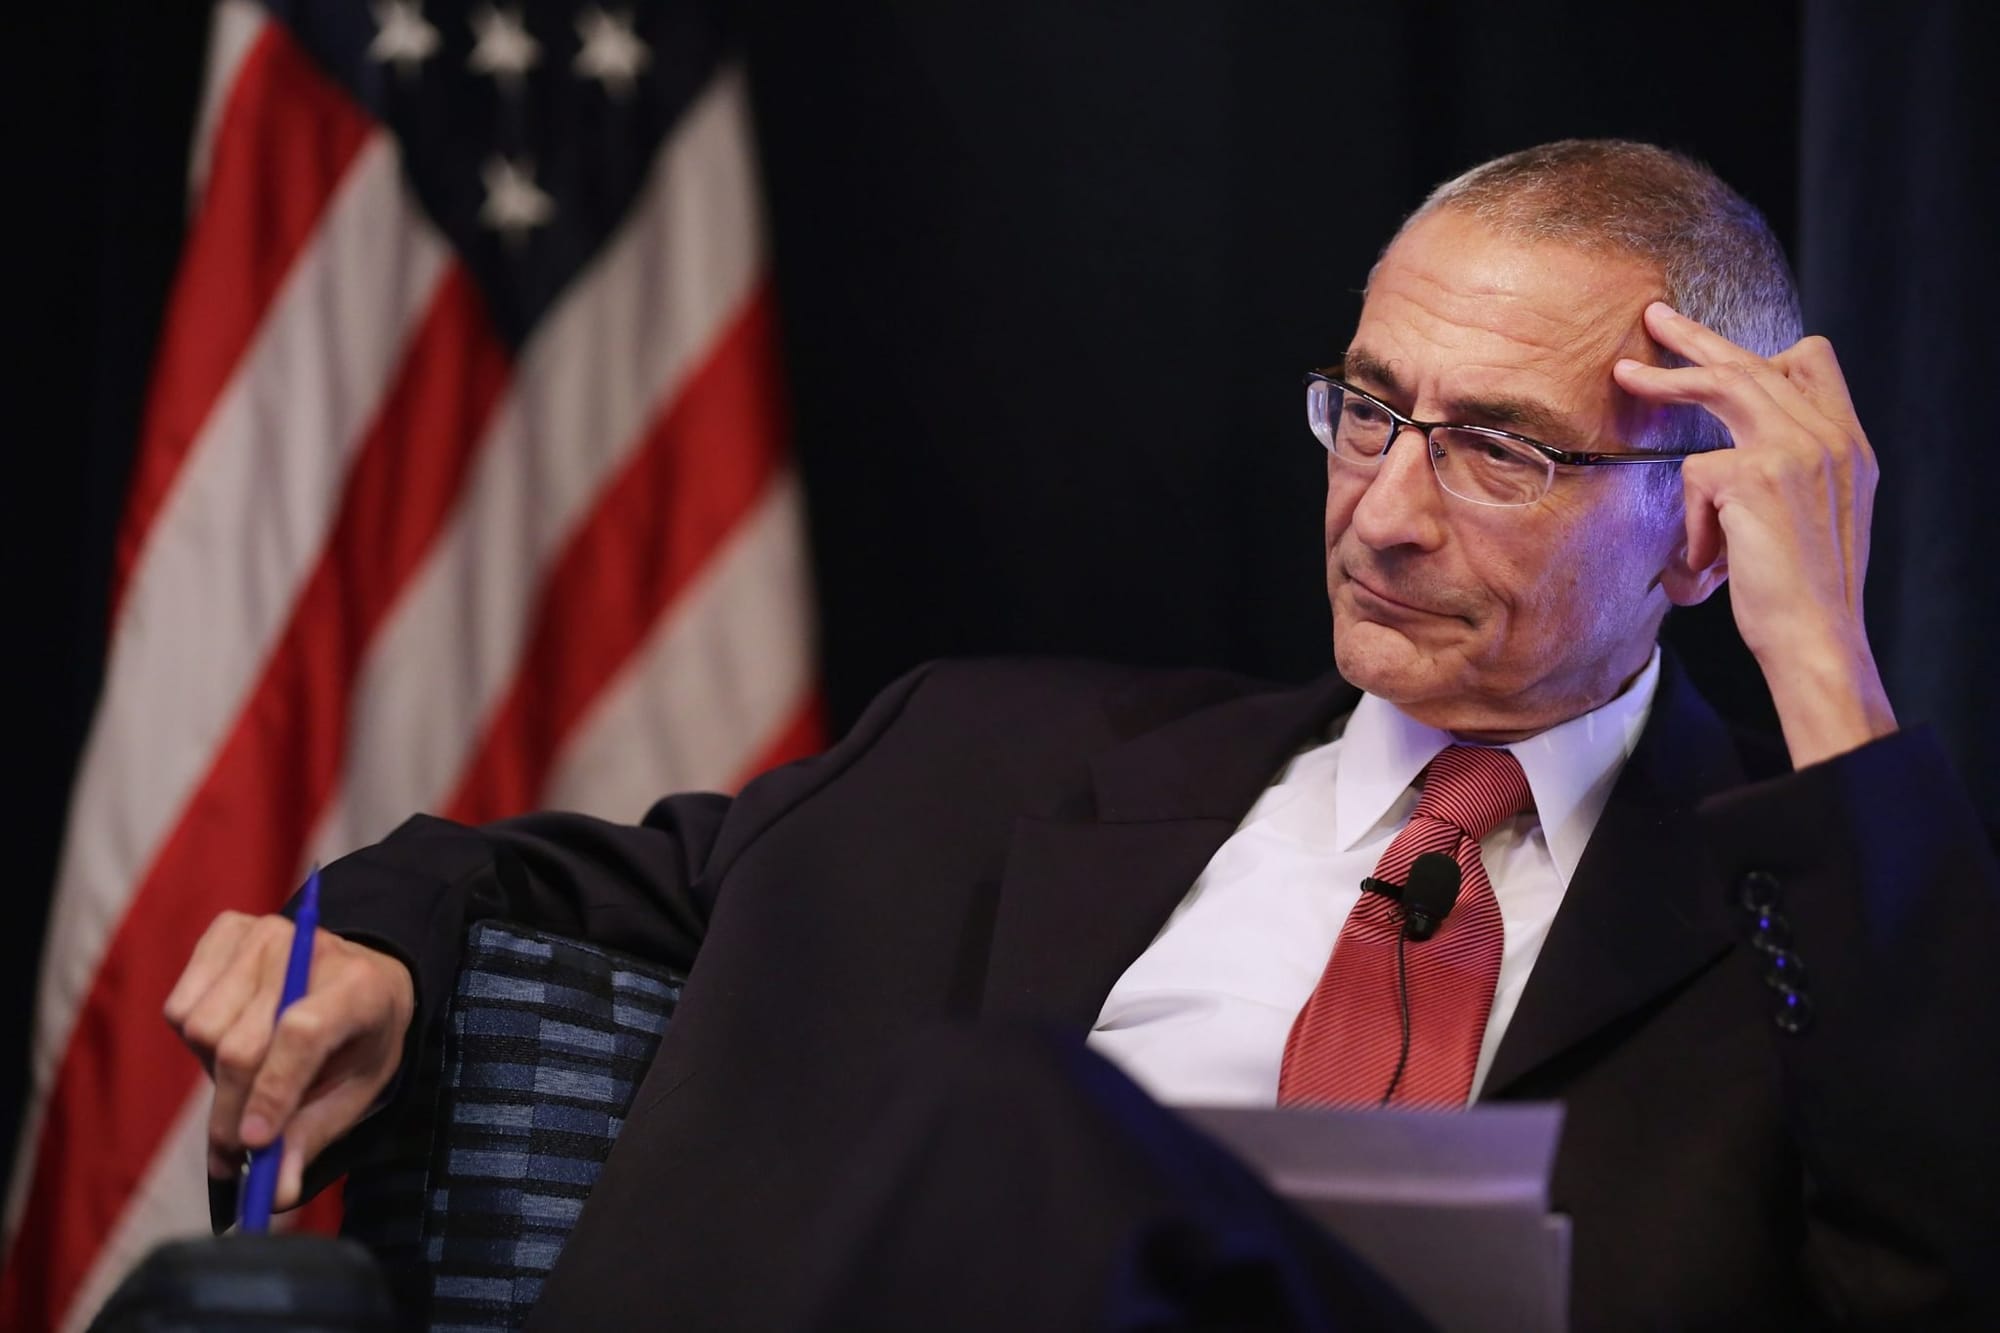 John Podesta Takes Over Top U.S. Climate Diplomat Role at Crucial Time for Biden’s Climate Agenda